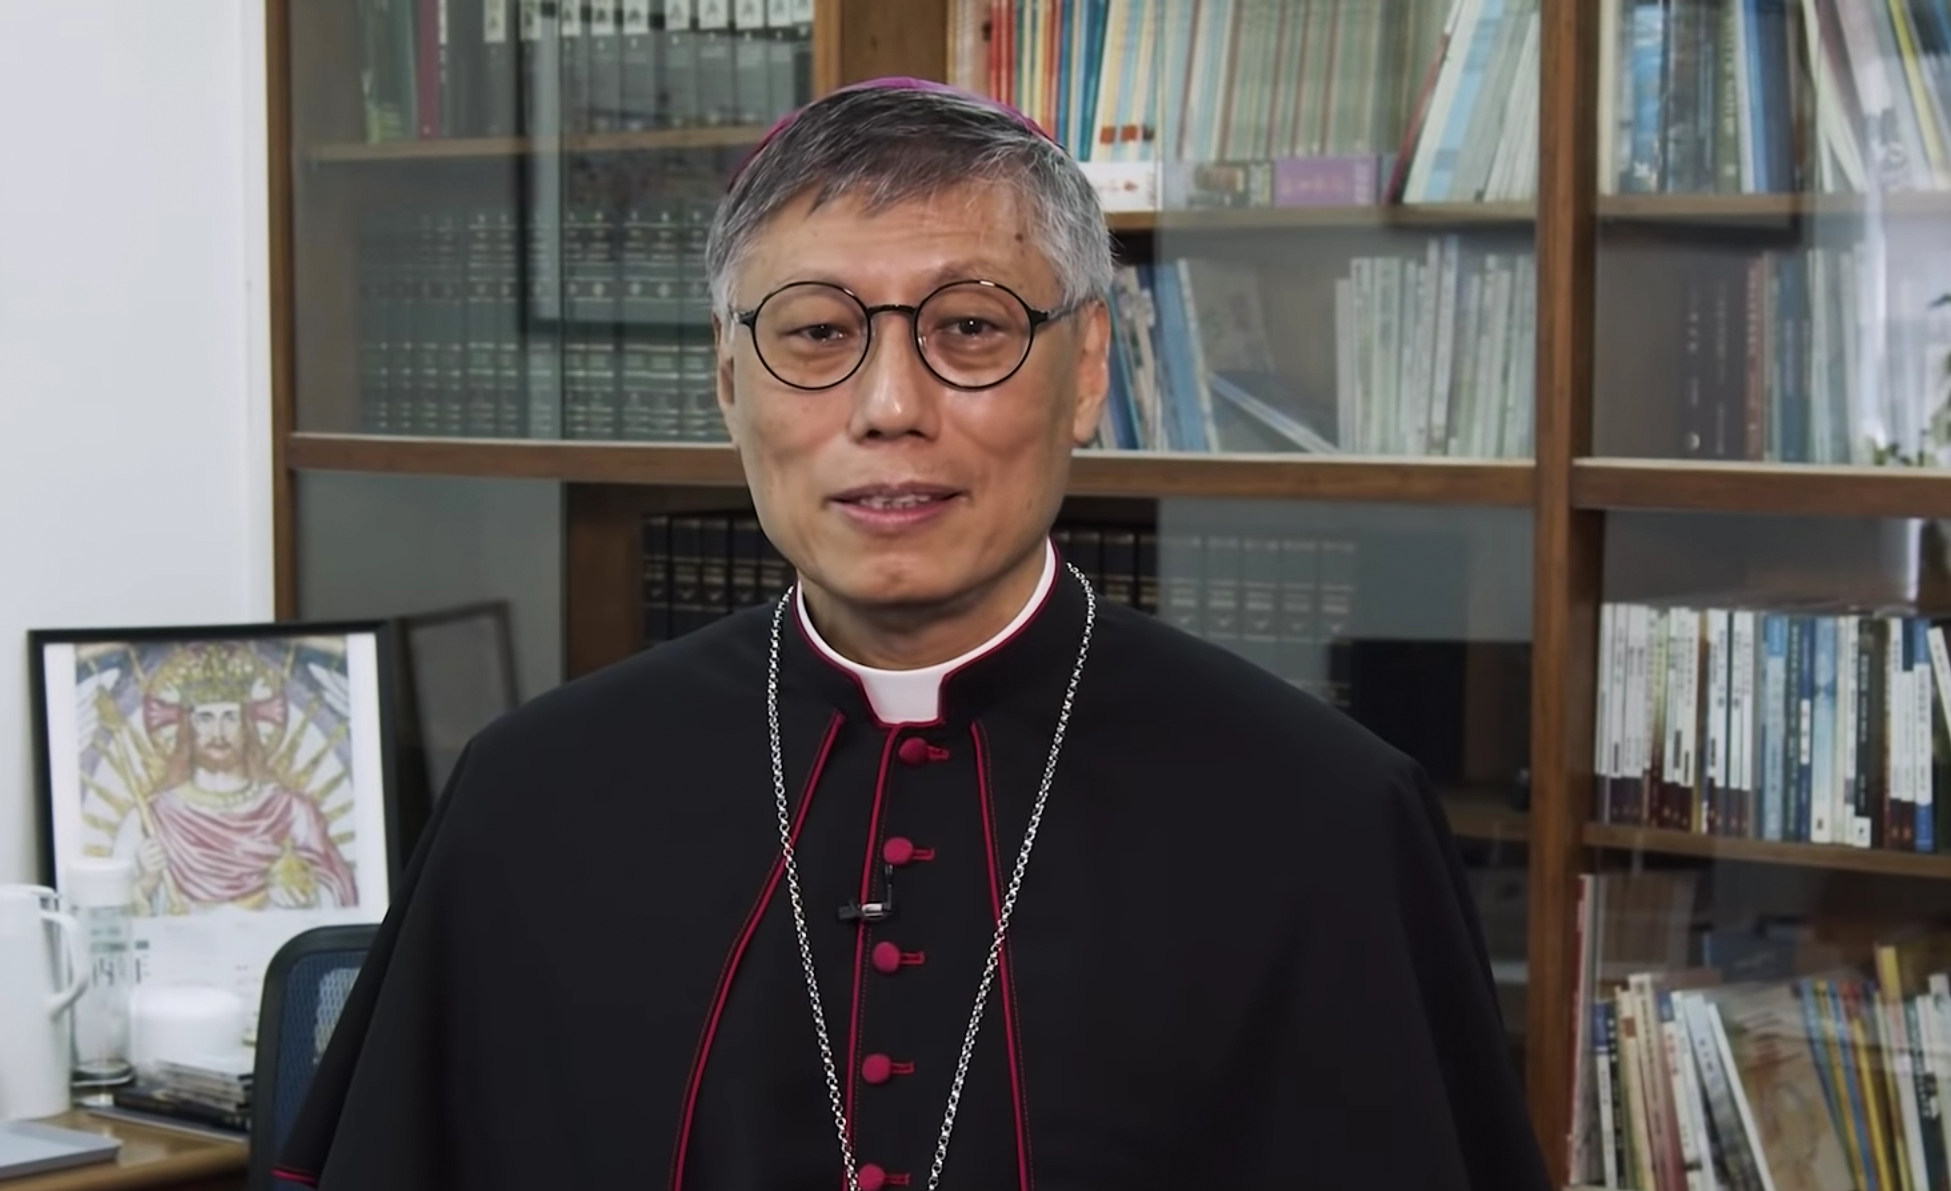 Bishop Stephen Chow of the Catholic Diocese of Hong Kong. Photo: Handout